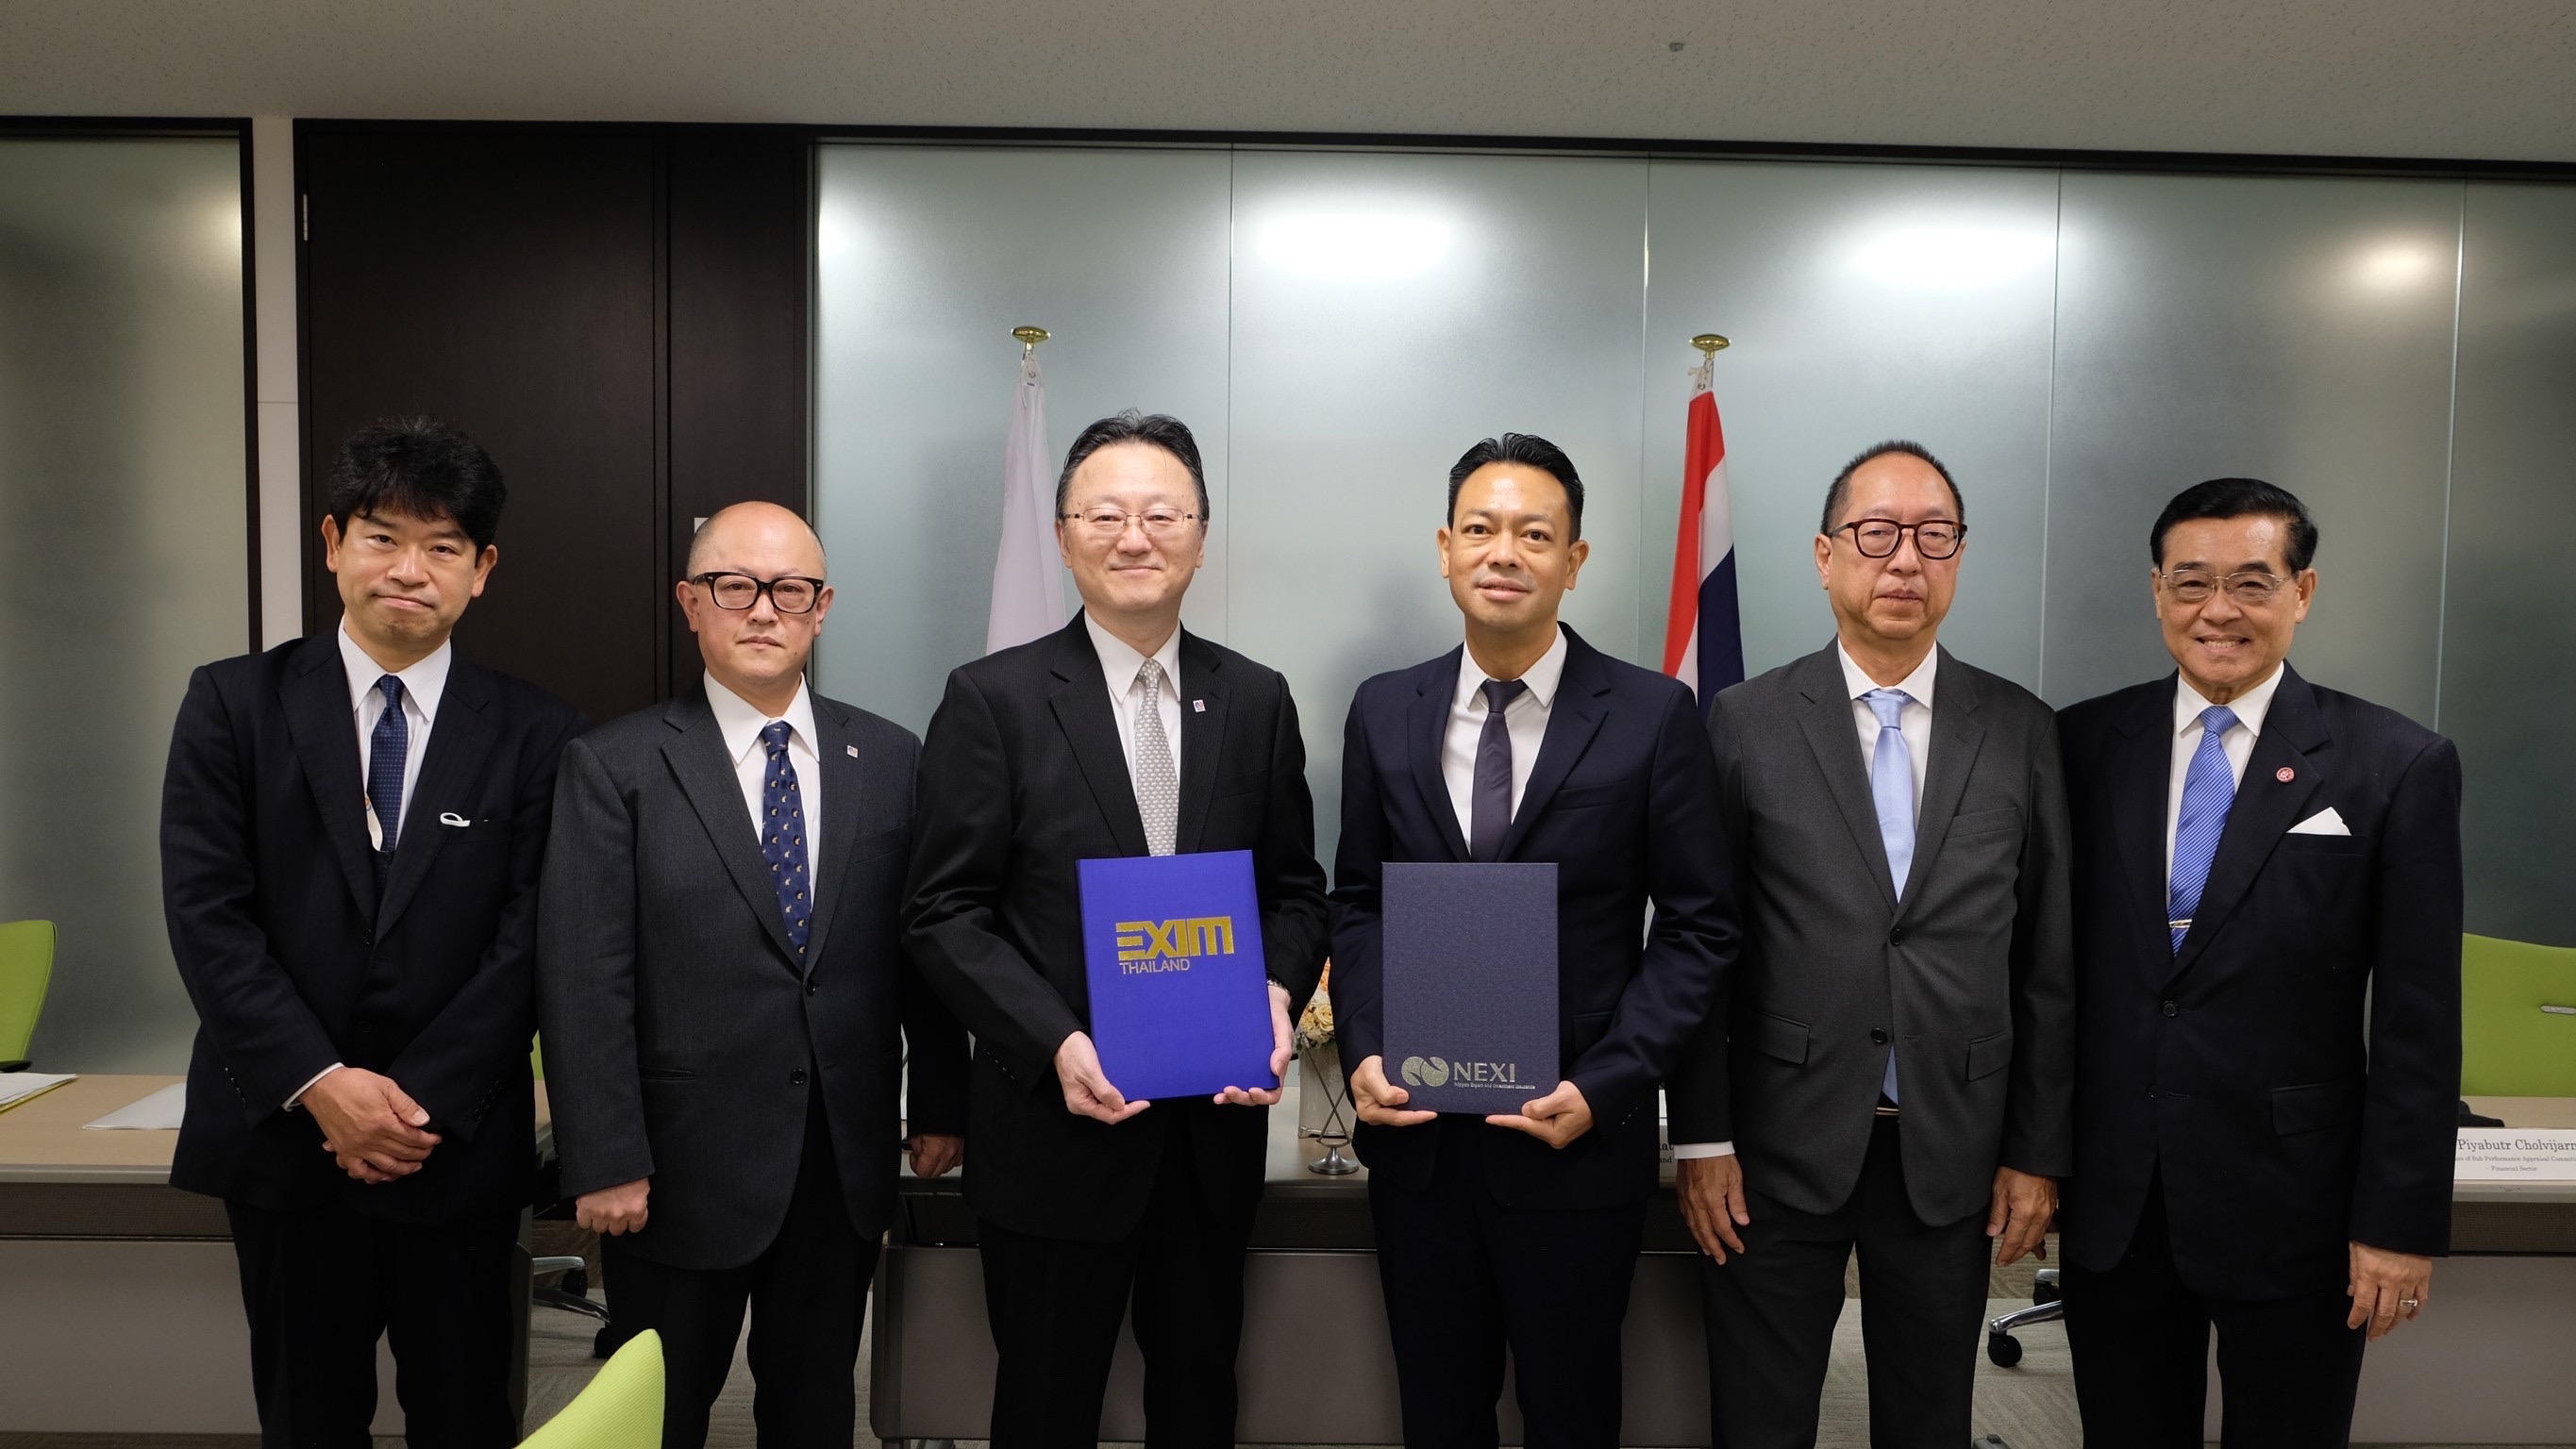 EXIM Thailand and NEXI inked an Addendum to the MOU executed of risk management tools for international trade and investment